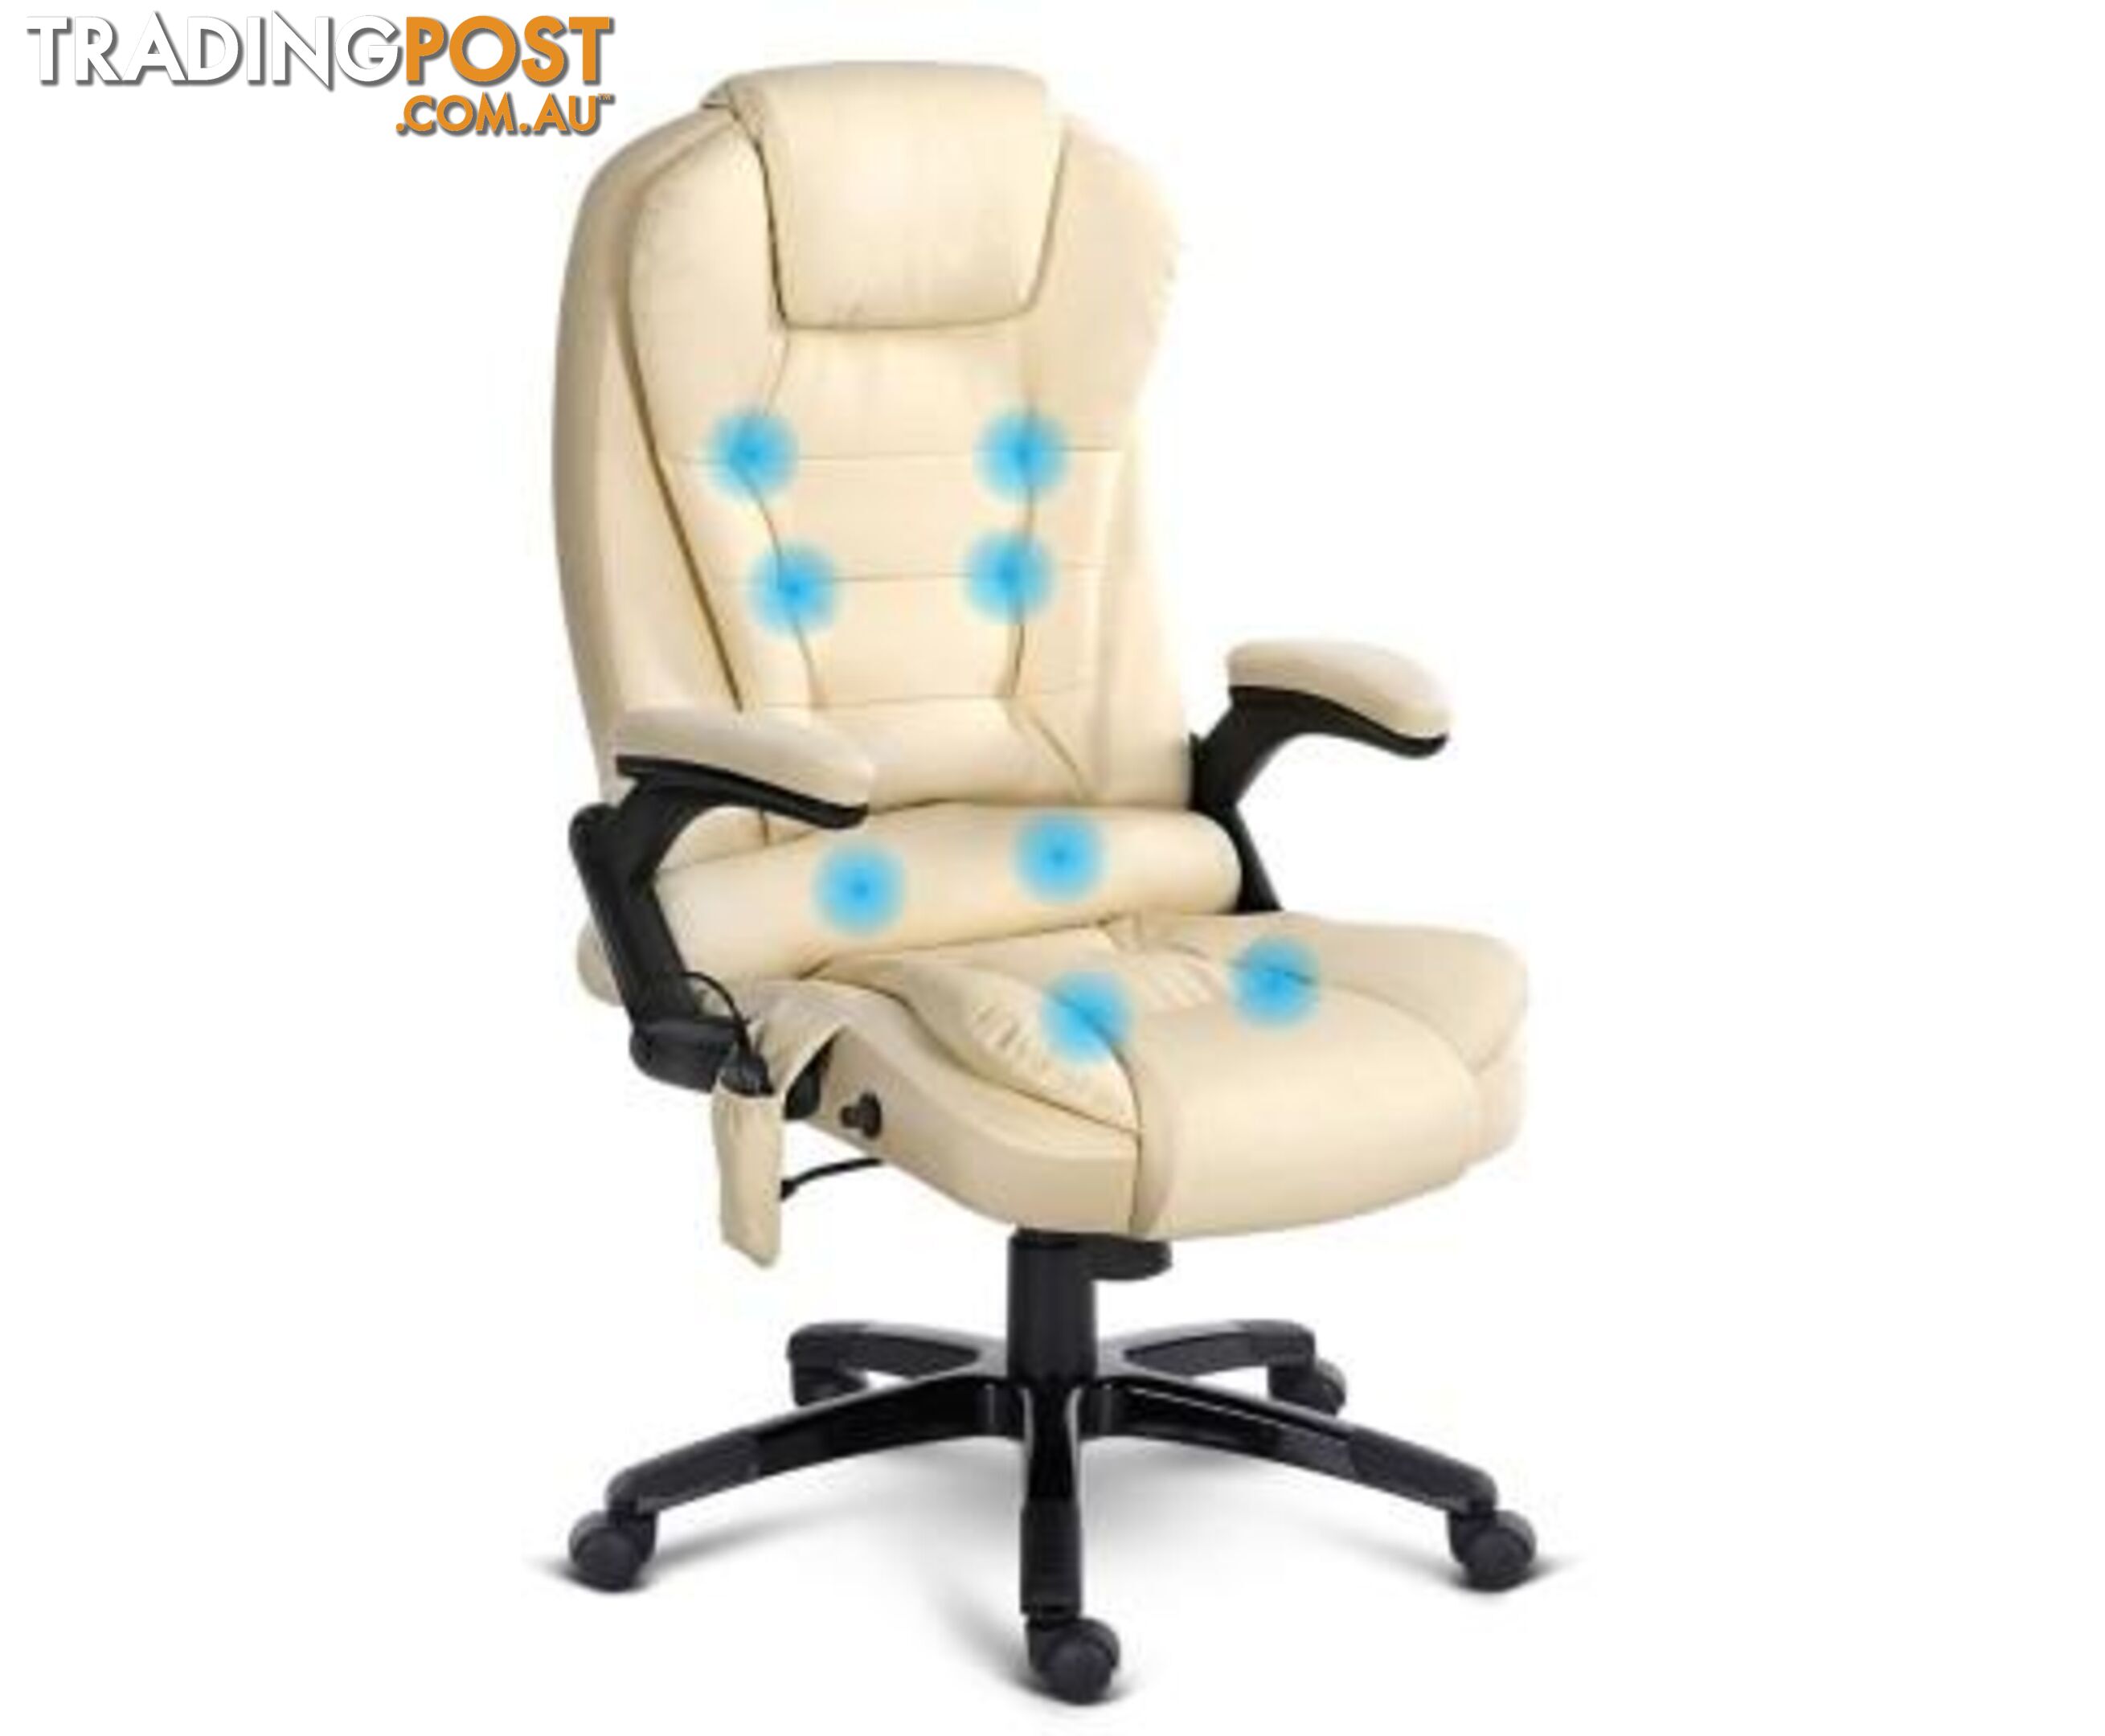 8 Point Massage Executive PU Leather Office Chair - Unbranded - 9350062110744